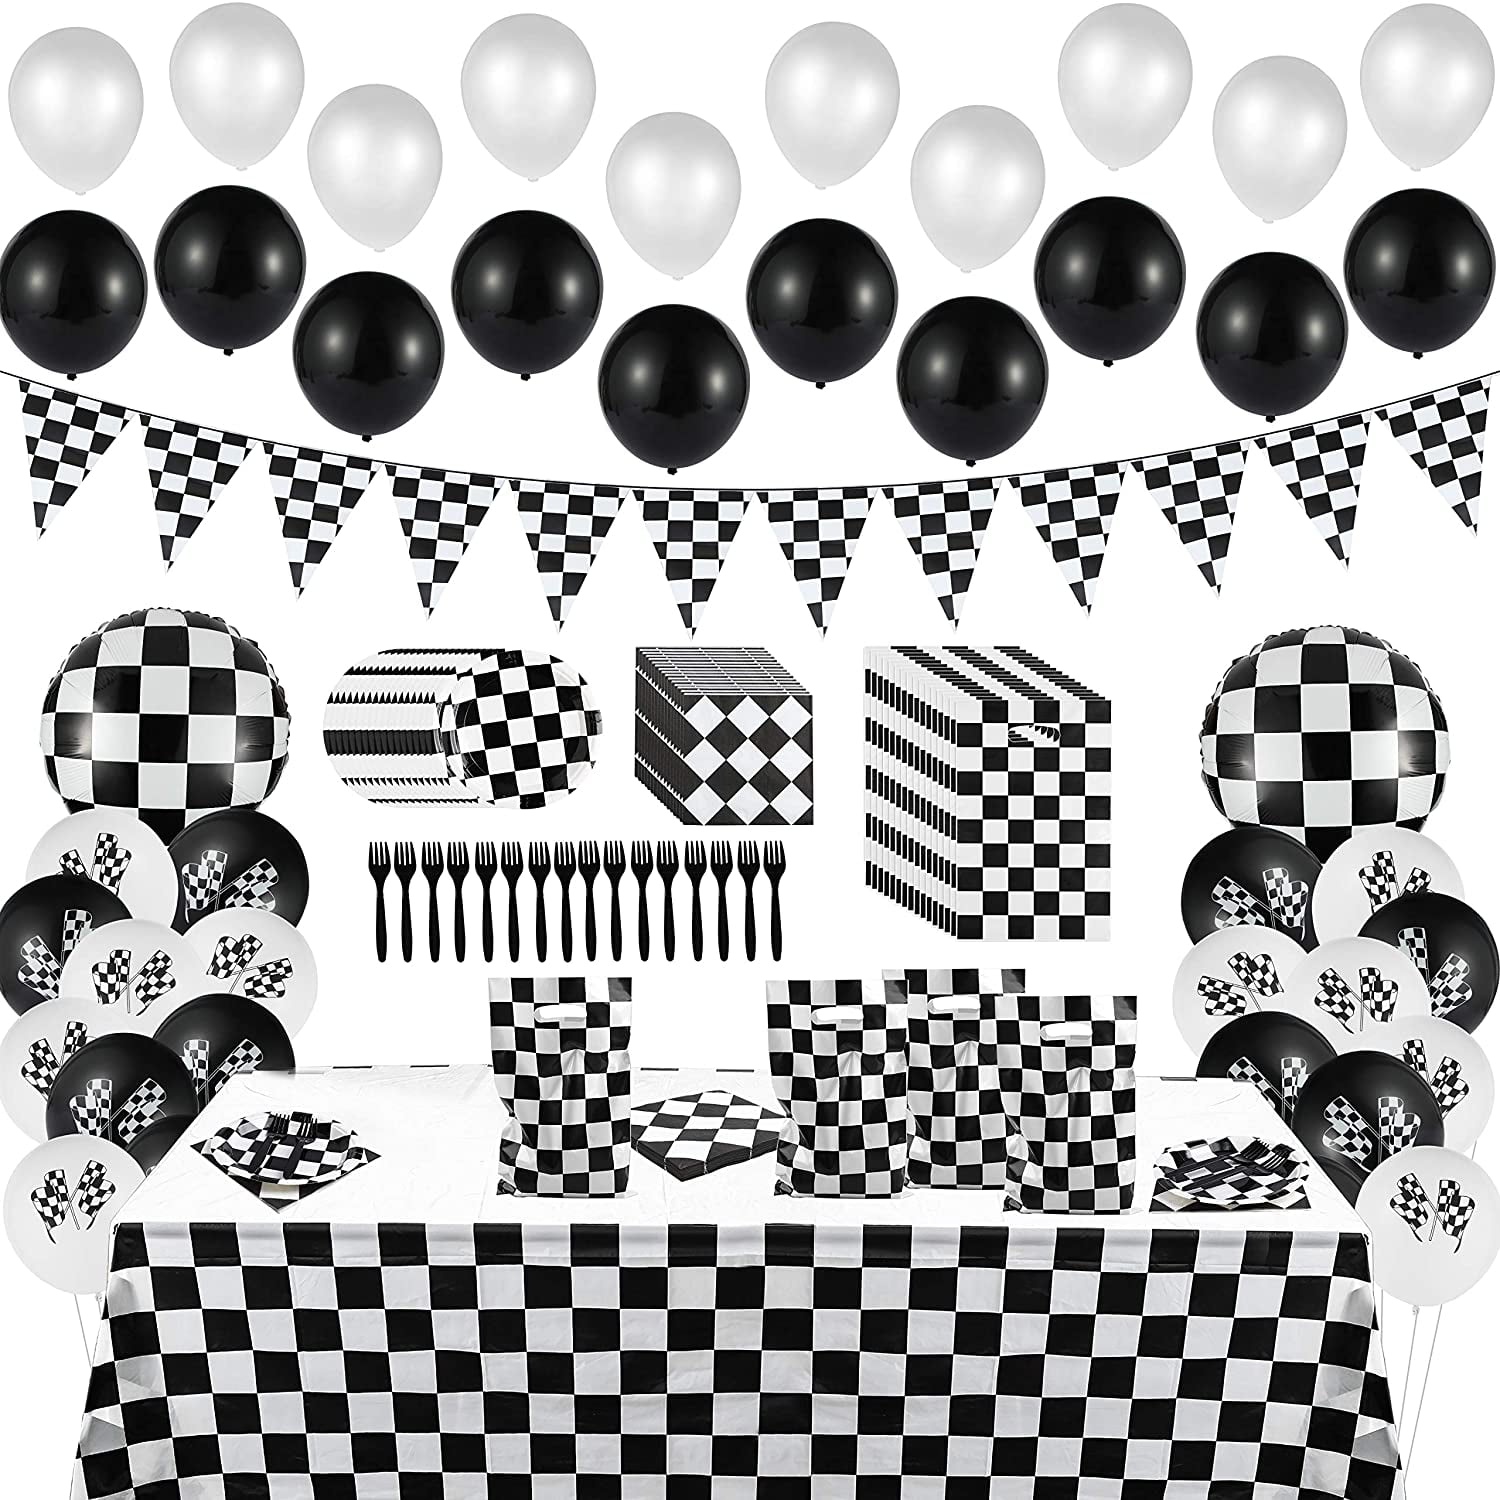 51 Pack Checkered Flag Racing Hand Held Stick Black & White Pennant Banner Decorations Supplies for Car Party Sport Events Kids Birthday Plastic Disposable Checkered Tablecloth 